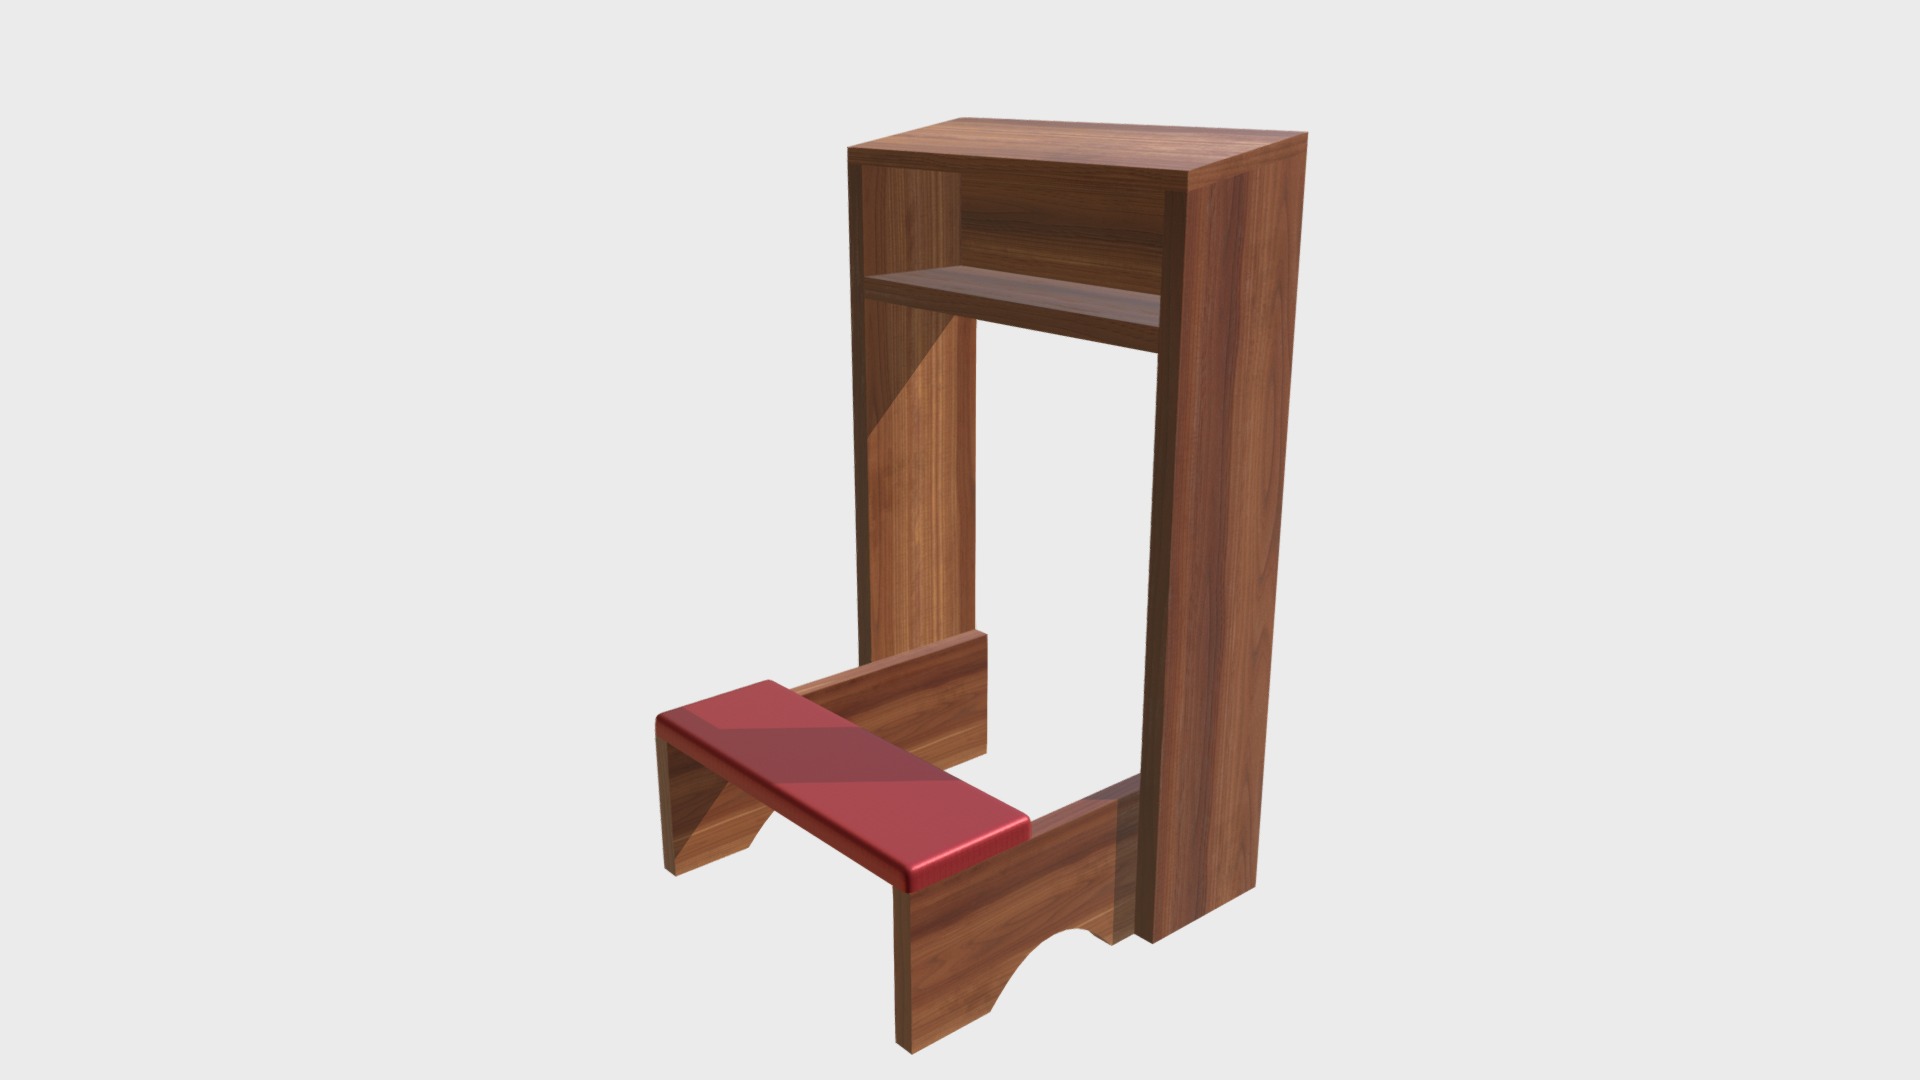 3D model Prayer kneeler - This is a 3D model of the Prayer kneeler. The 3D model is about a wooden chair with a red cushion.